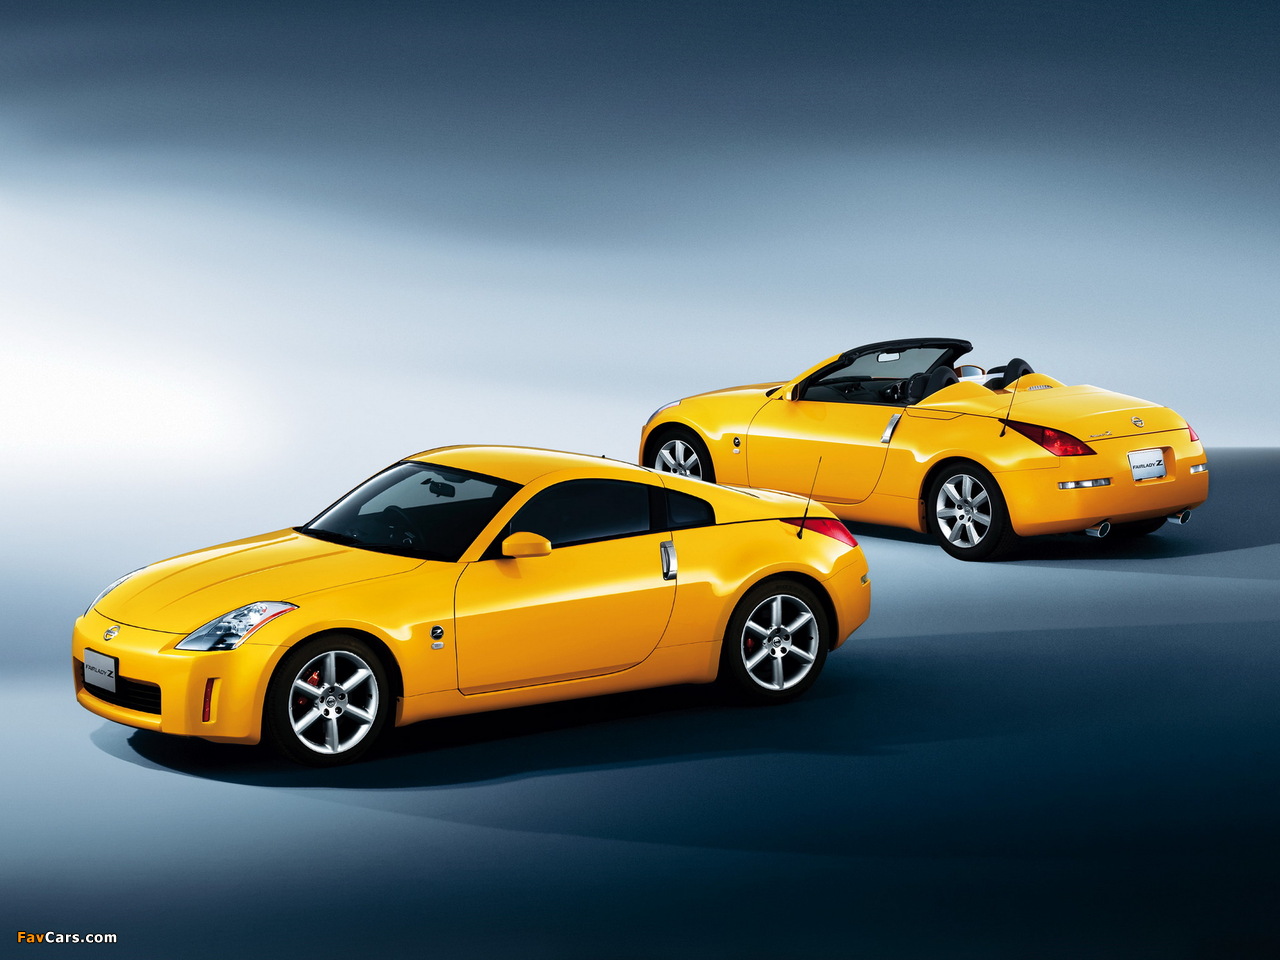 Images of Nissan Fairlady (1280 x 960)